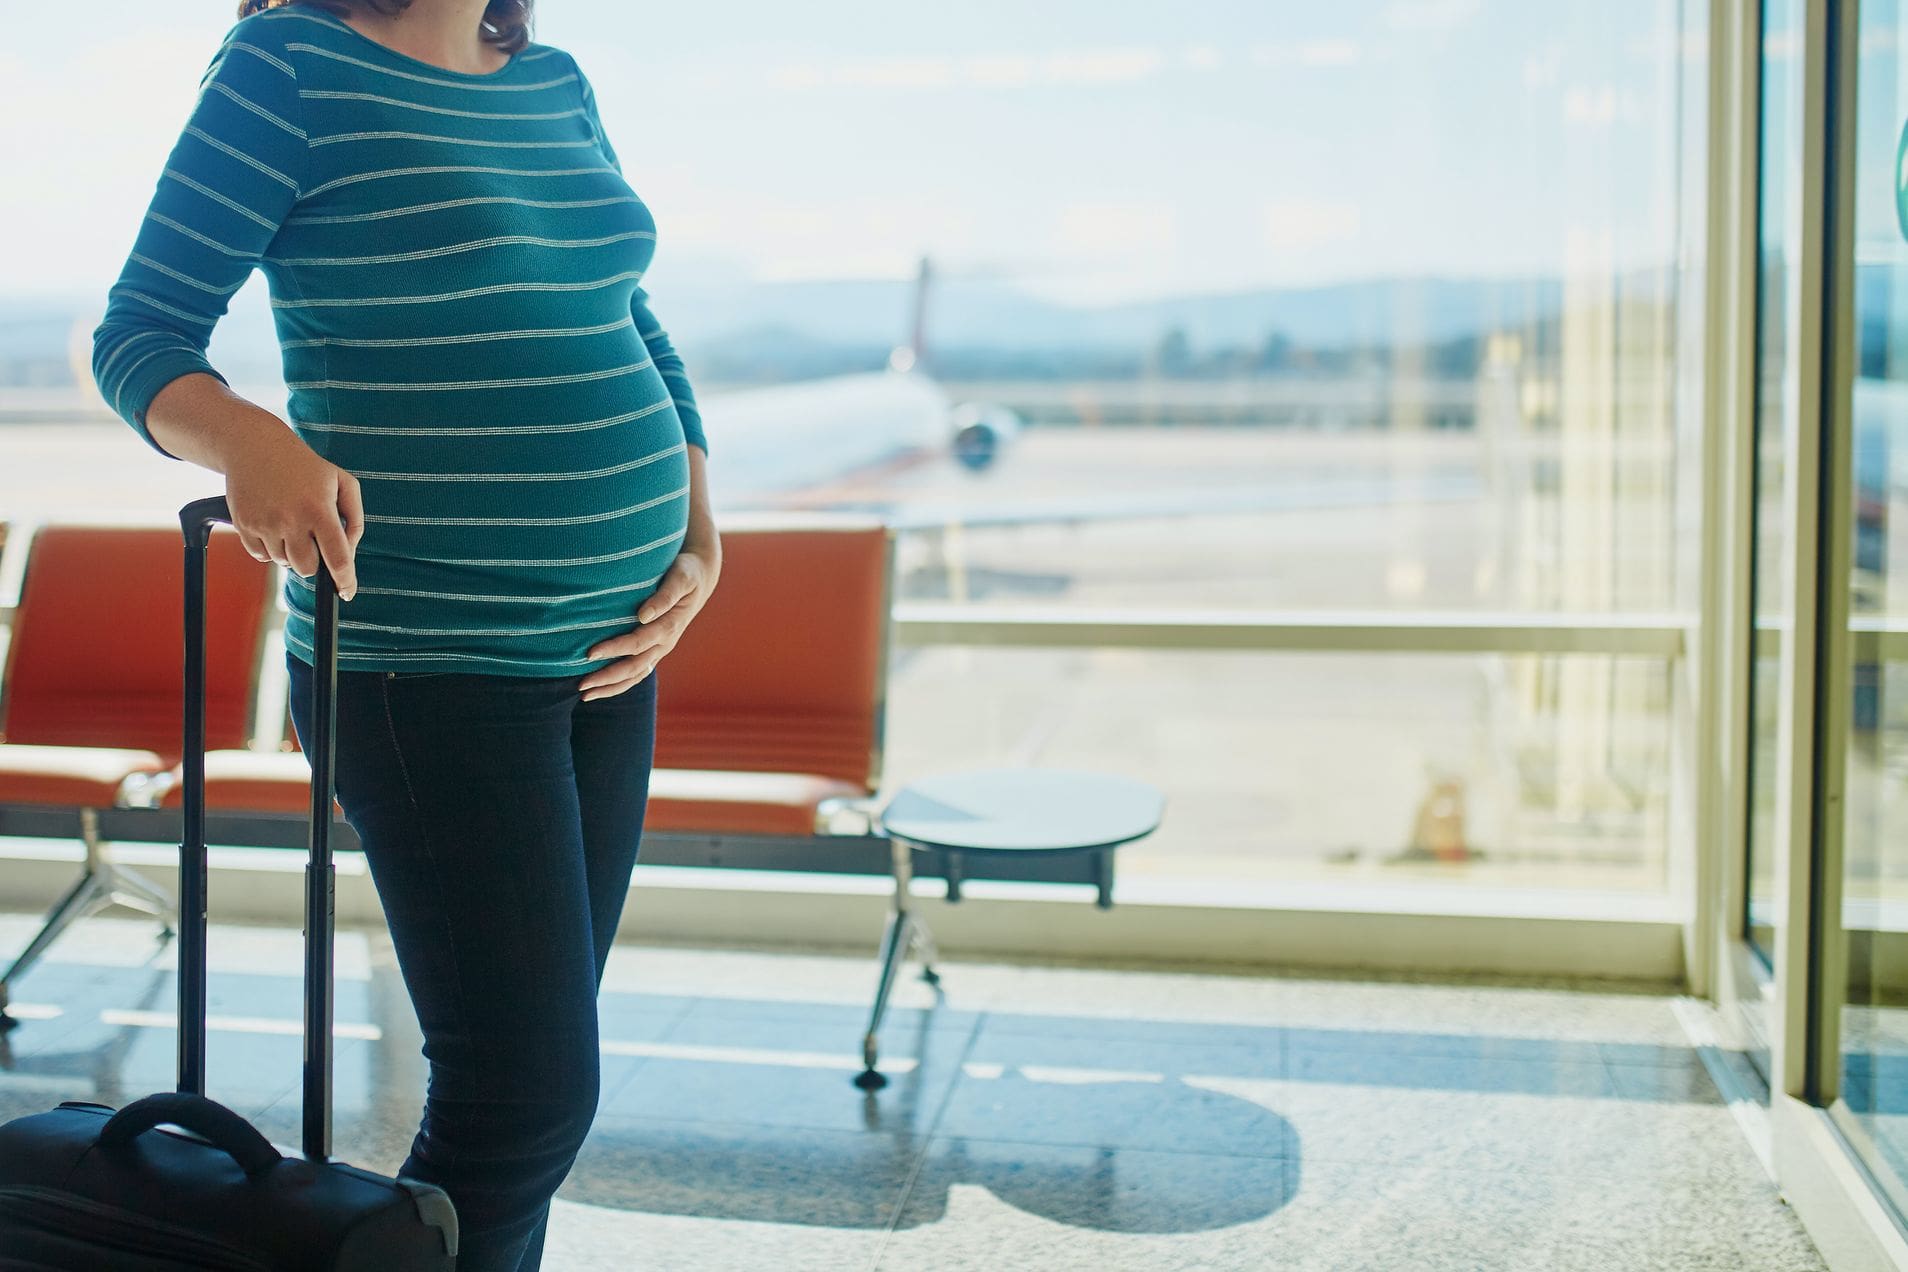 What is the travel advice if I am pregnant?